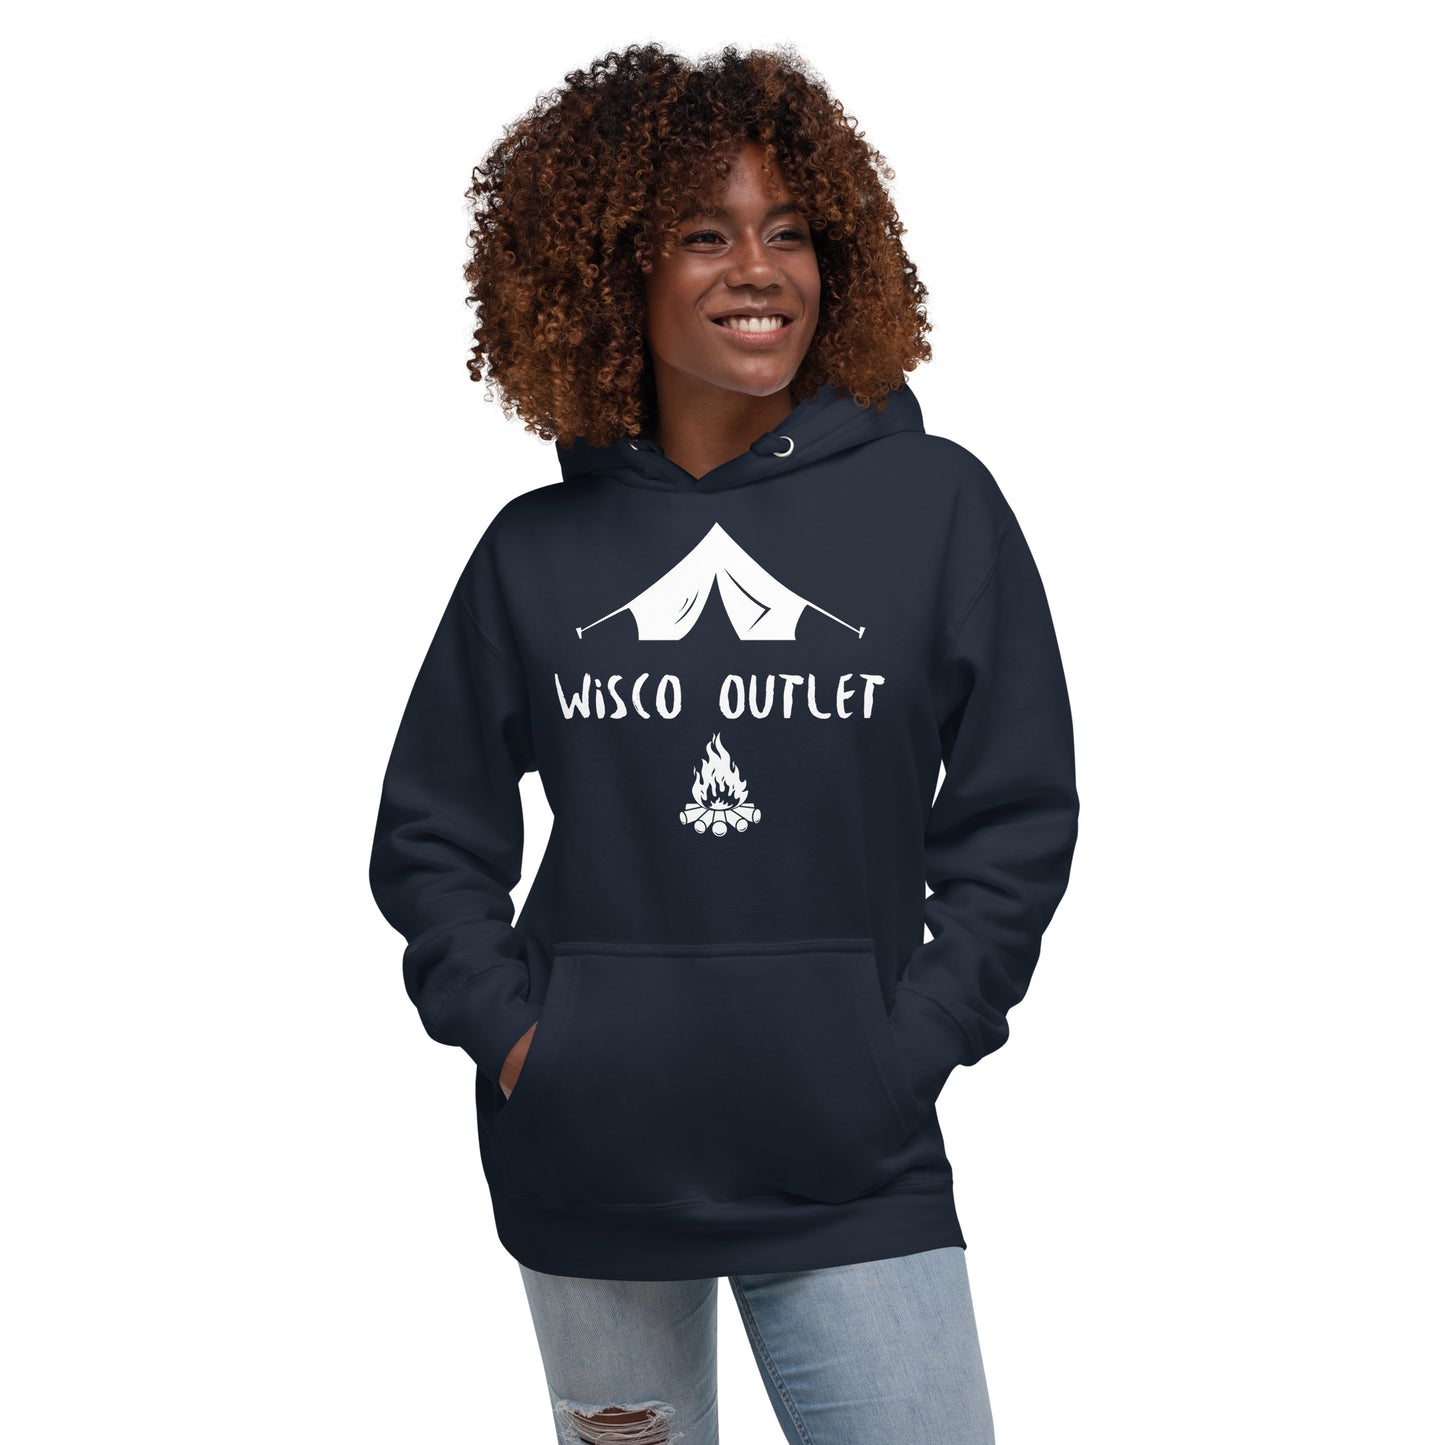 Wisco Outlet Camping Sweatshirt